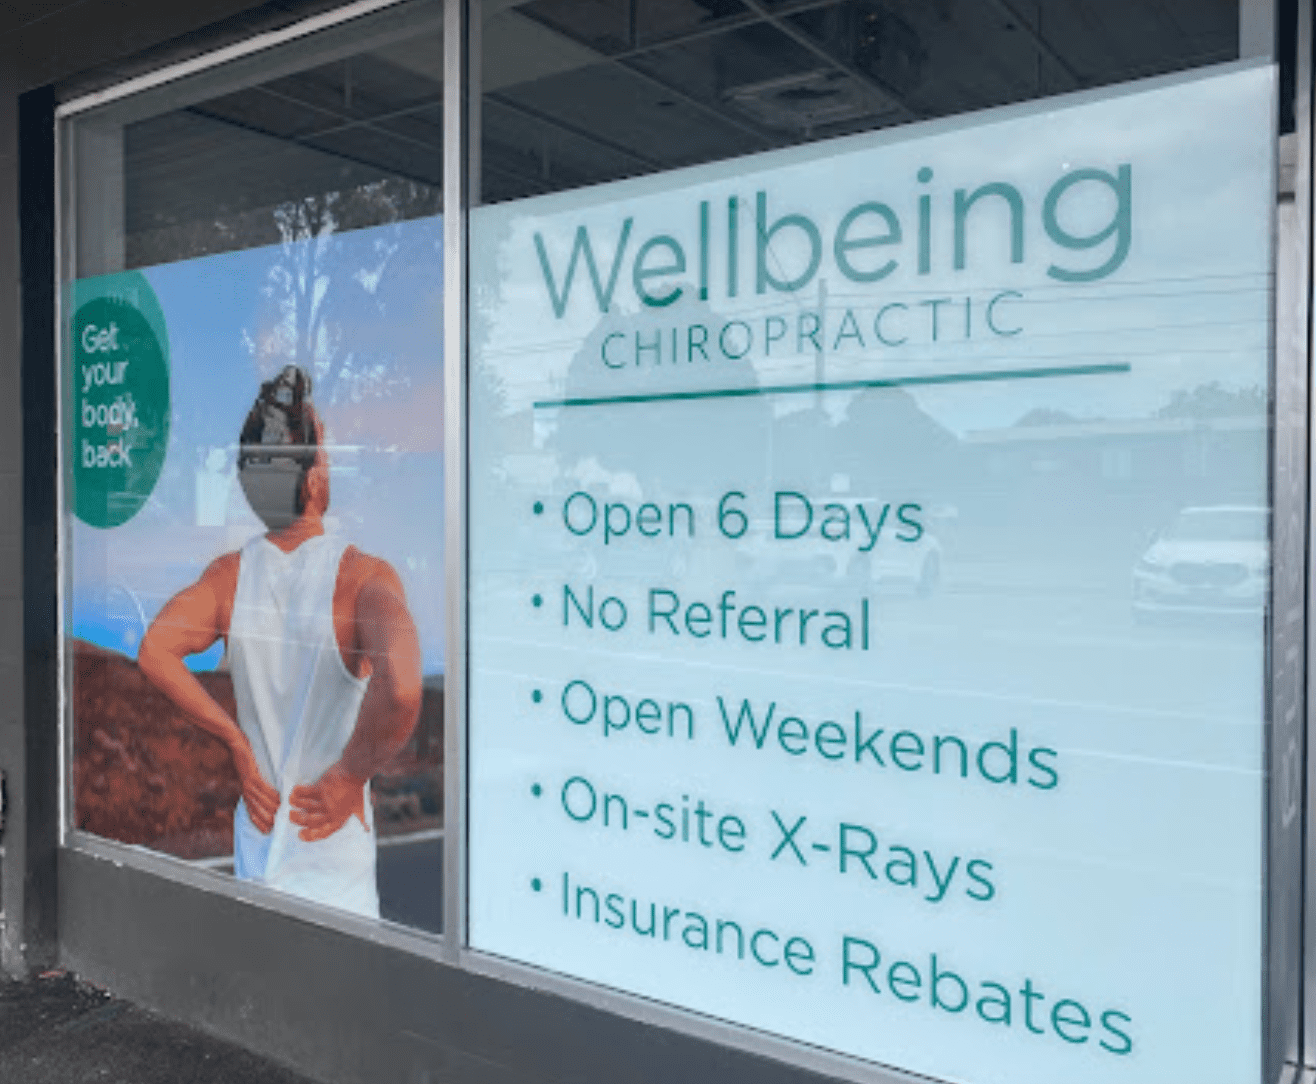 Wellbeing Chiropractic Clinic